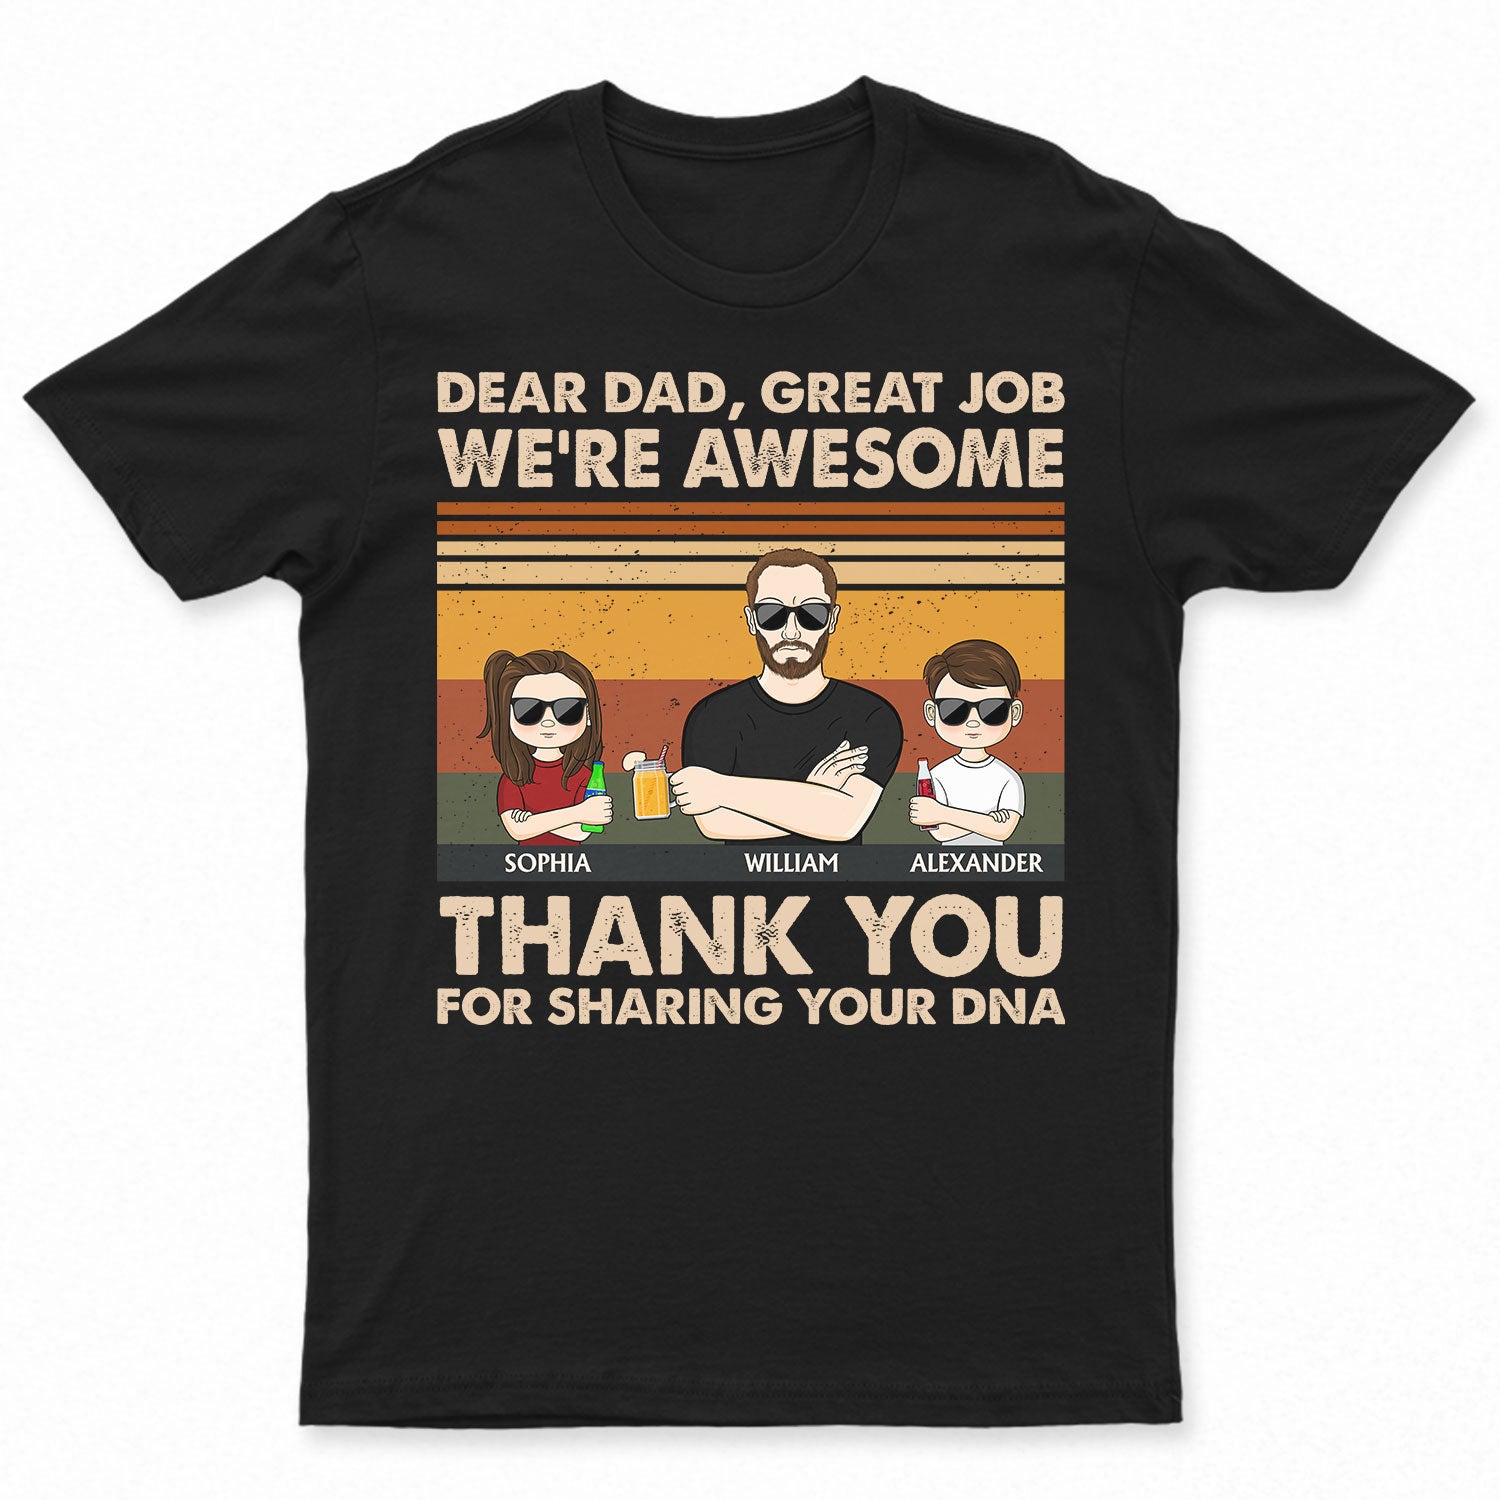 Dear Dad Great Job Thank You For Sharing Your DNA - Funny, Birthday Gift For Father, Husband - Personalized Custom T Shirt